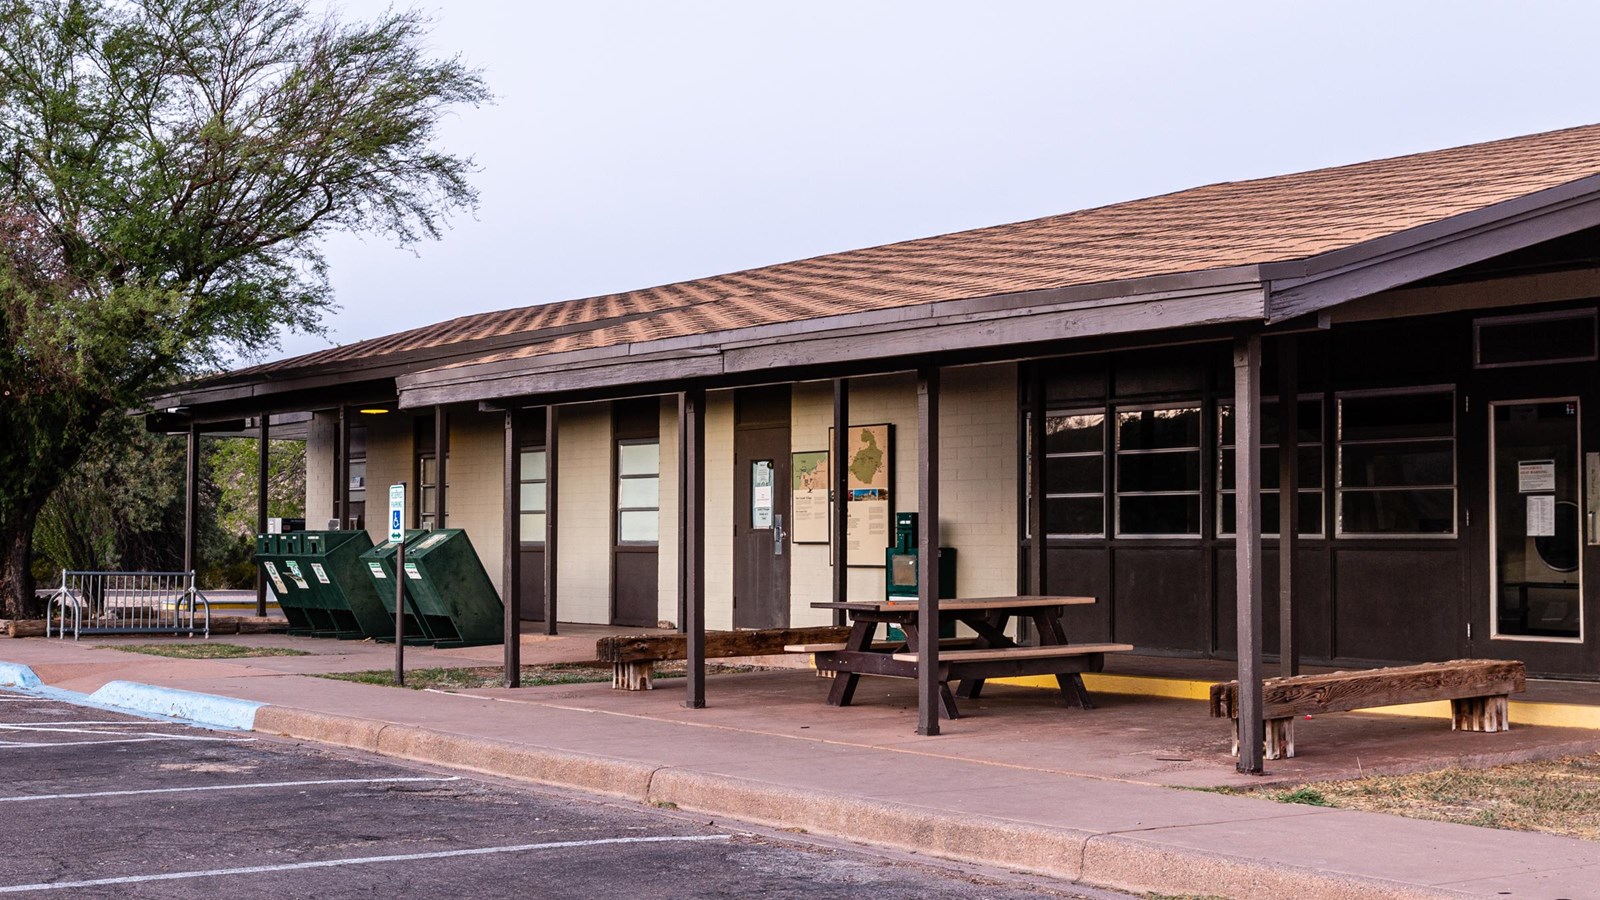 Exterior of the one-story Rio Grande Village store with picnic tables under a porch.